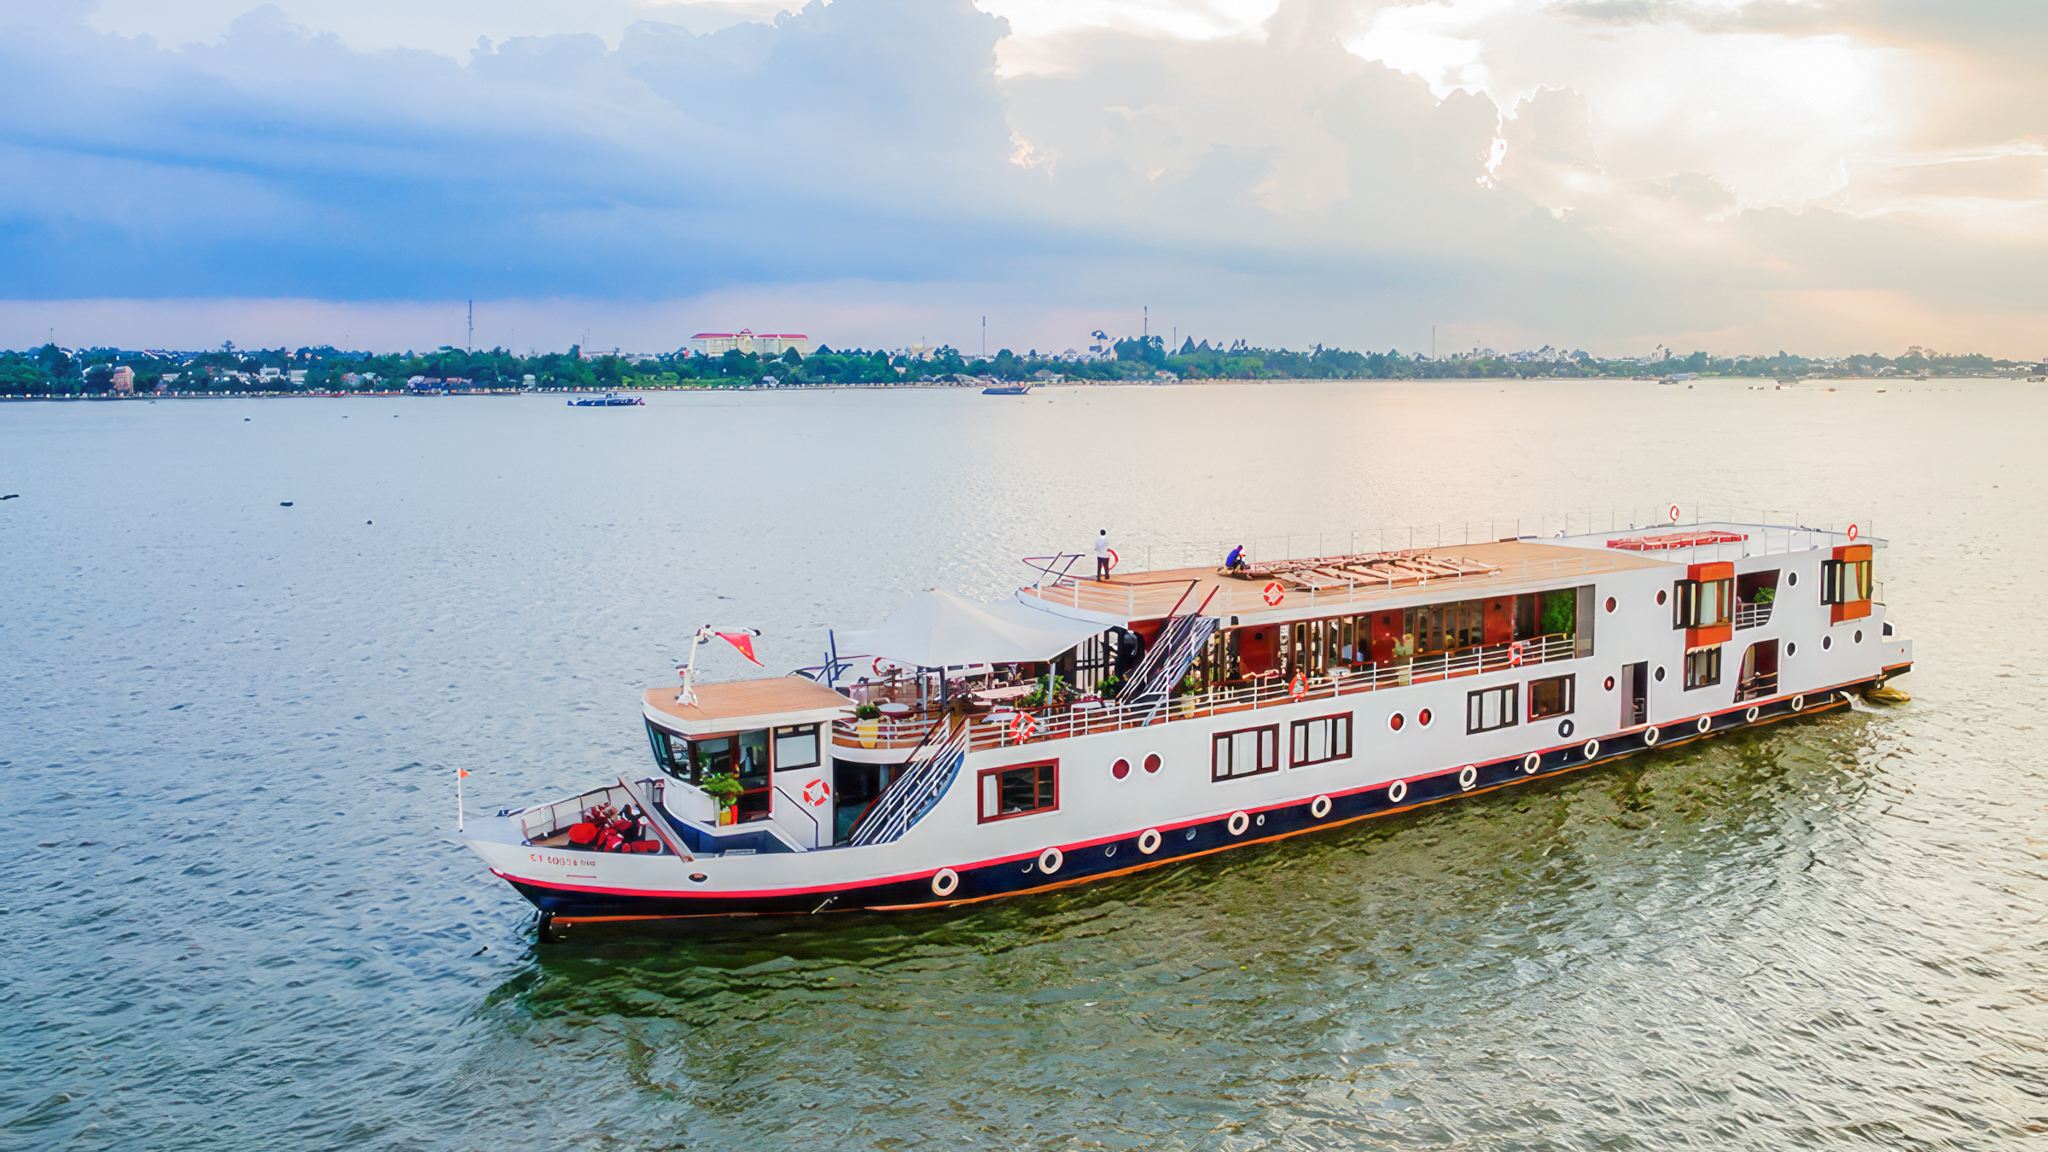 MEKONG DELTA CRUISE 2 DAYS 1 NIGHT -  SAI GON CAI BE - CAN THO OVERNIGHT ON 4 STAR CRUISE